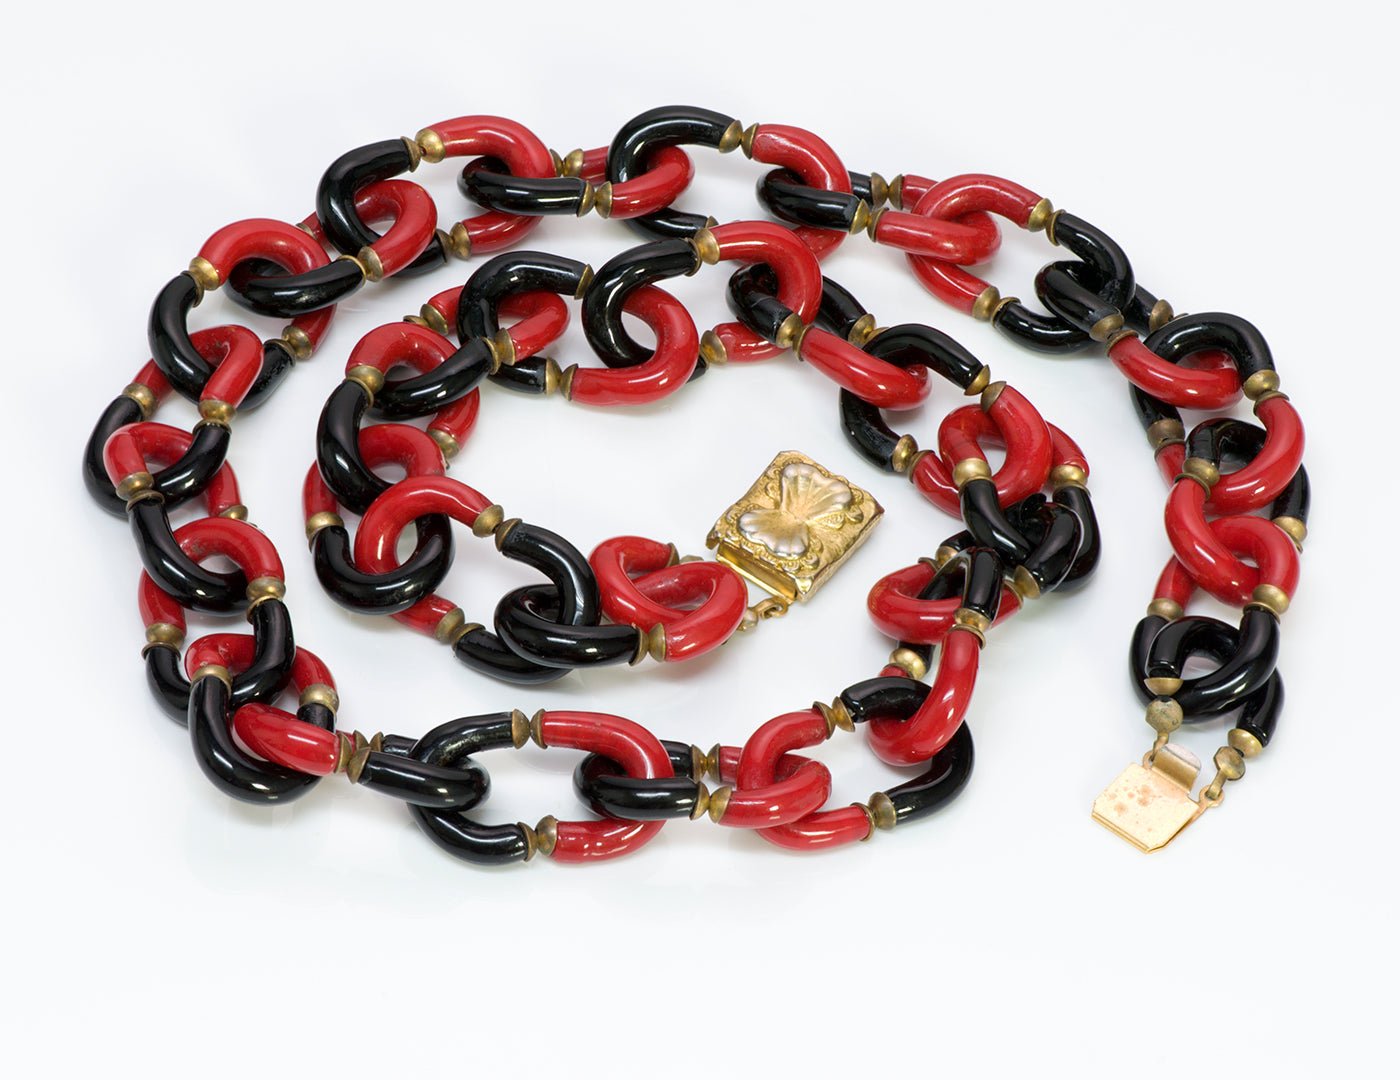 Archimede Seguso Chanel 1960’s Black Red Glass Chain Link Necklace